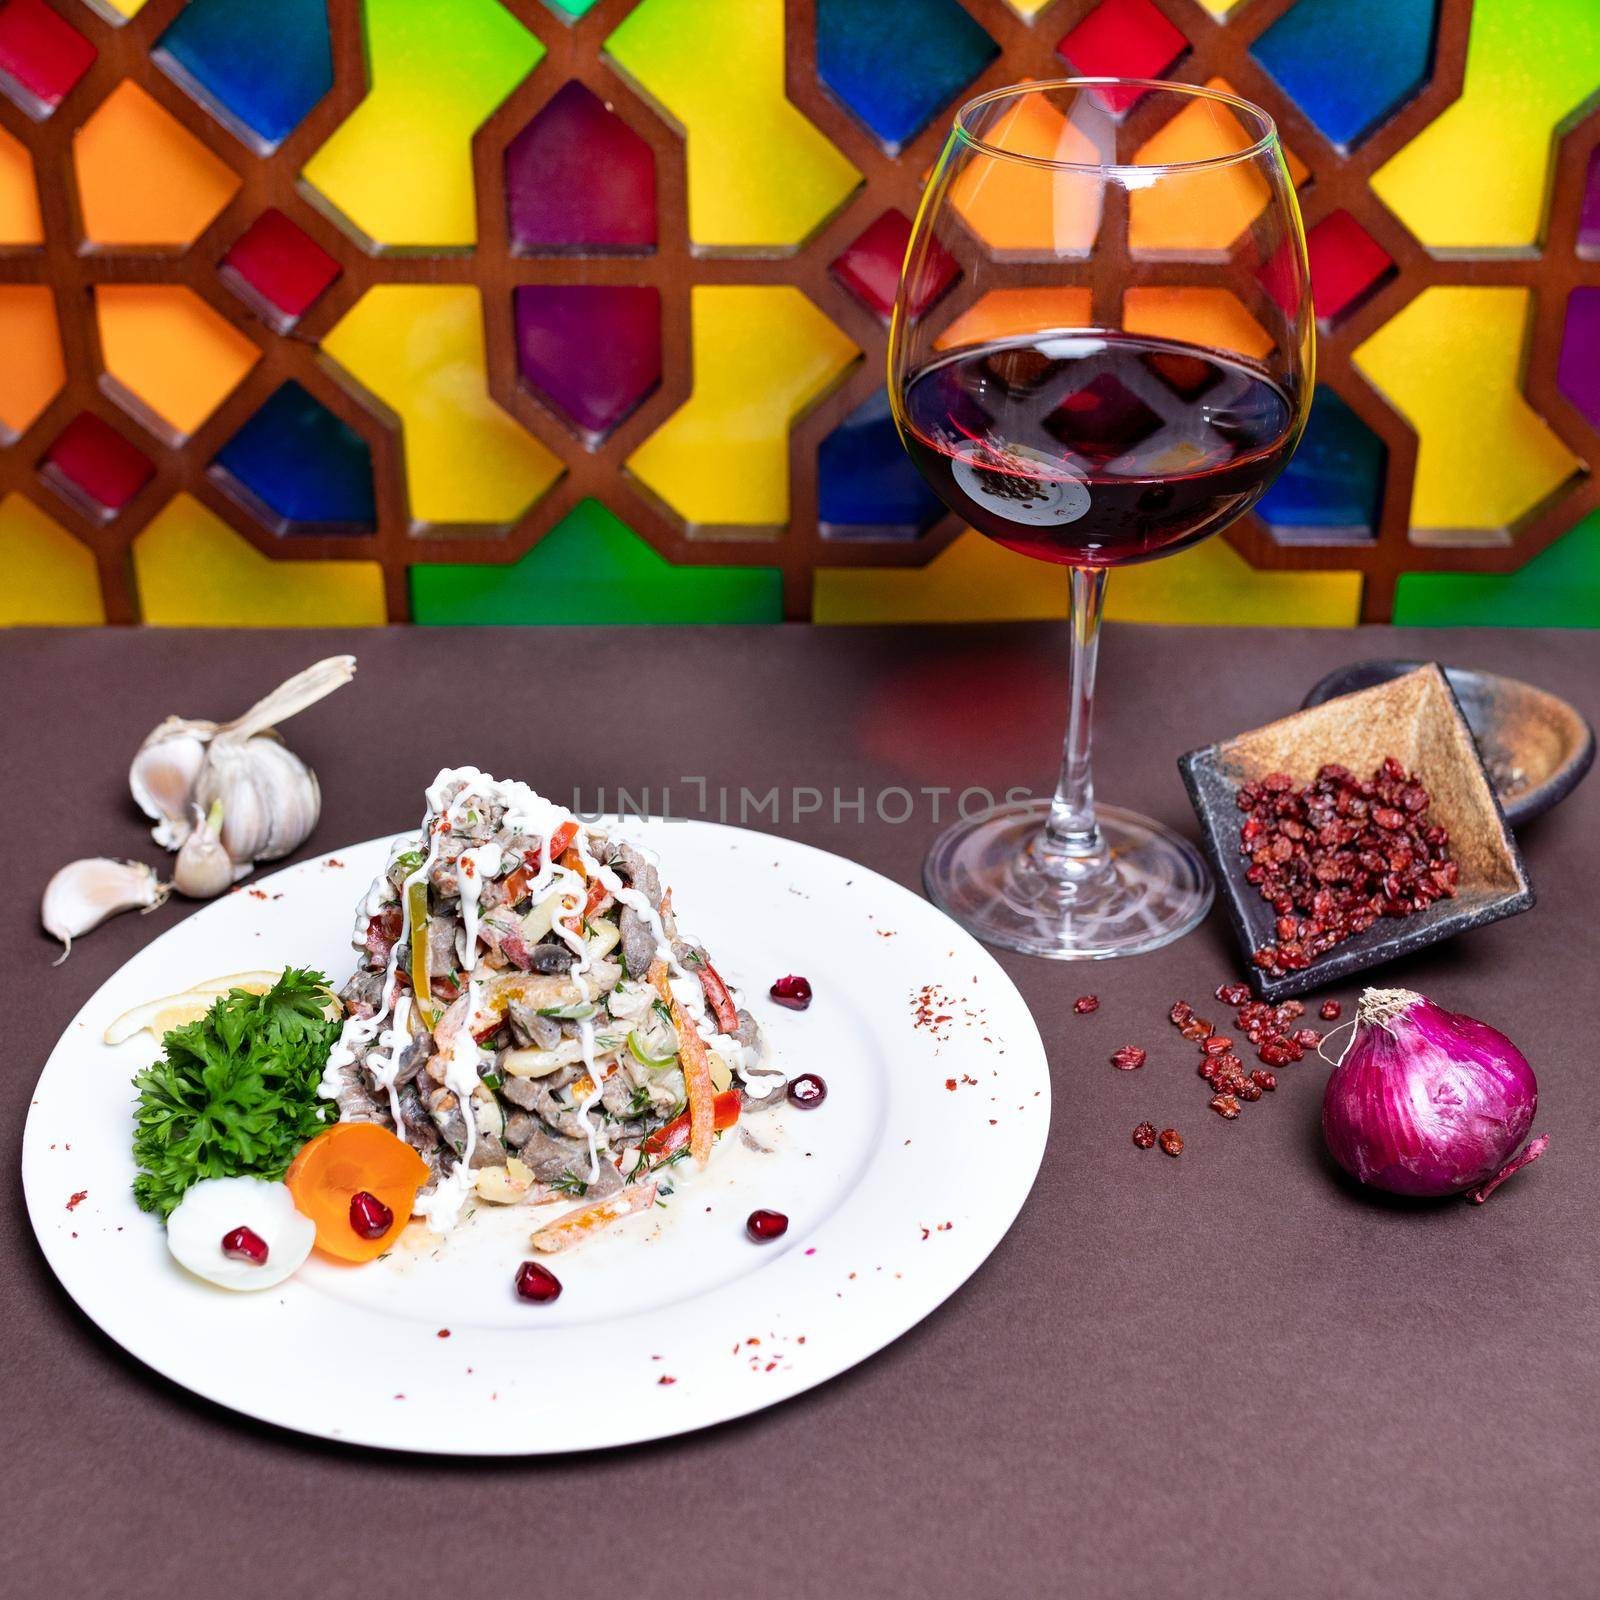 Tasty salad with red wine with colorful background by ferhad